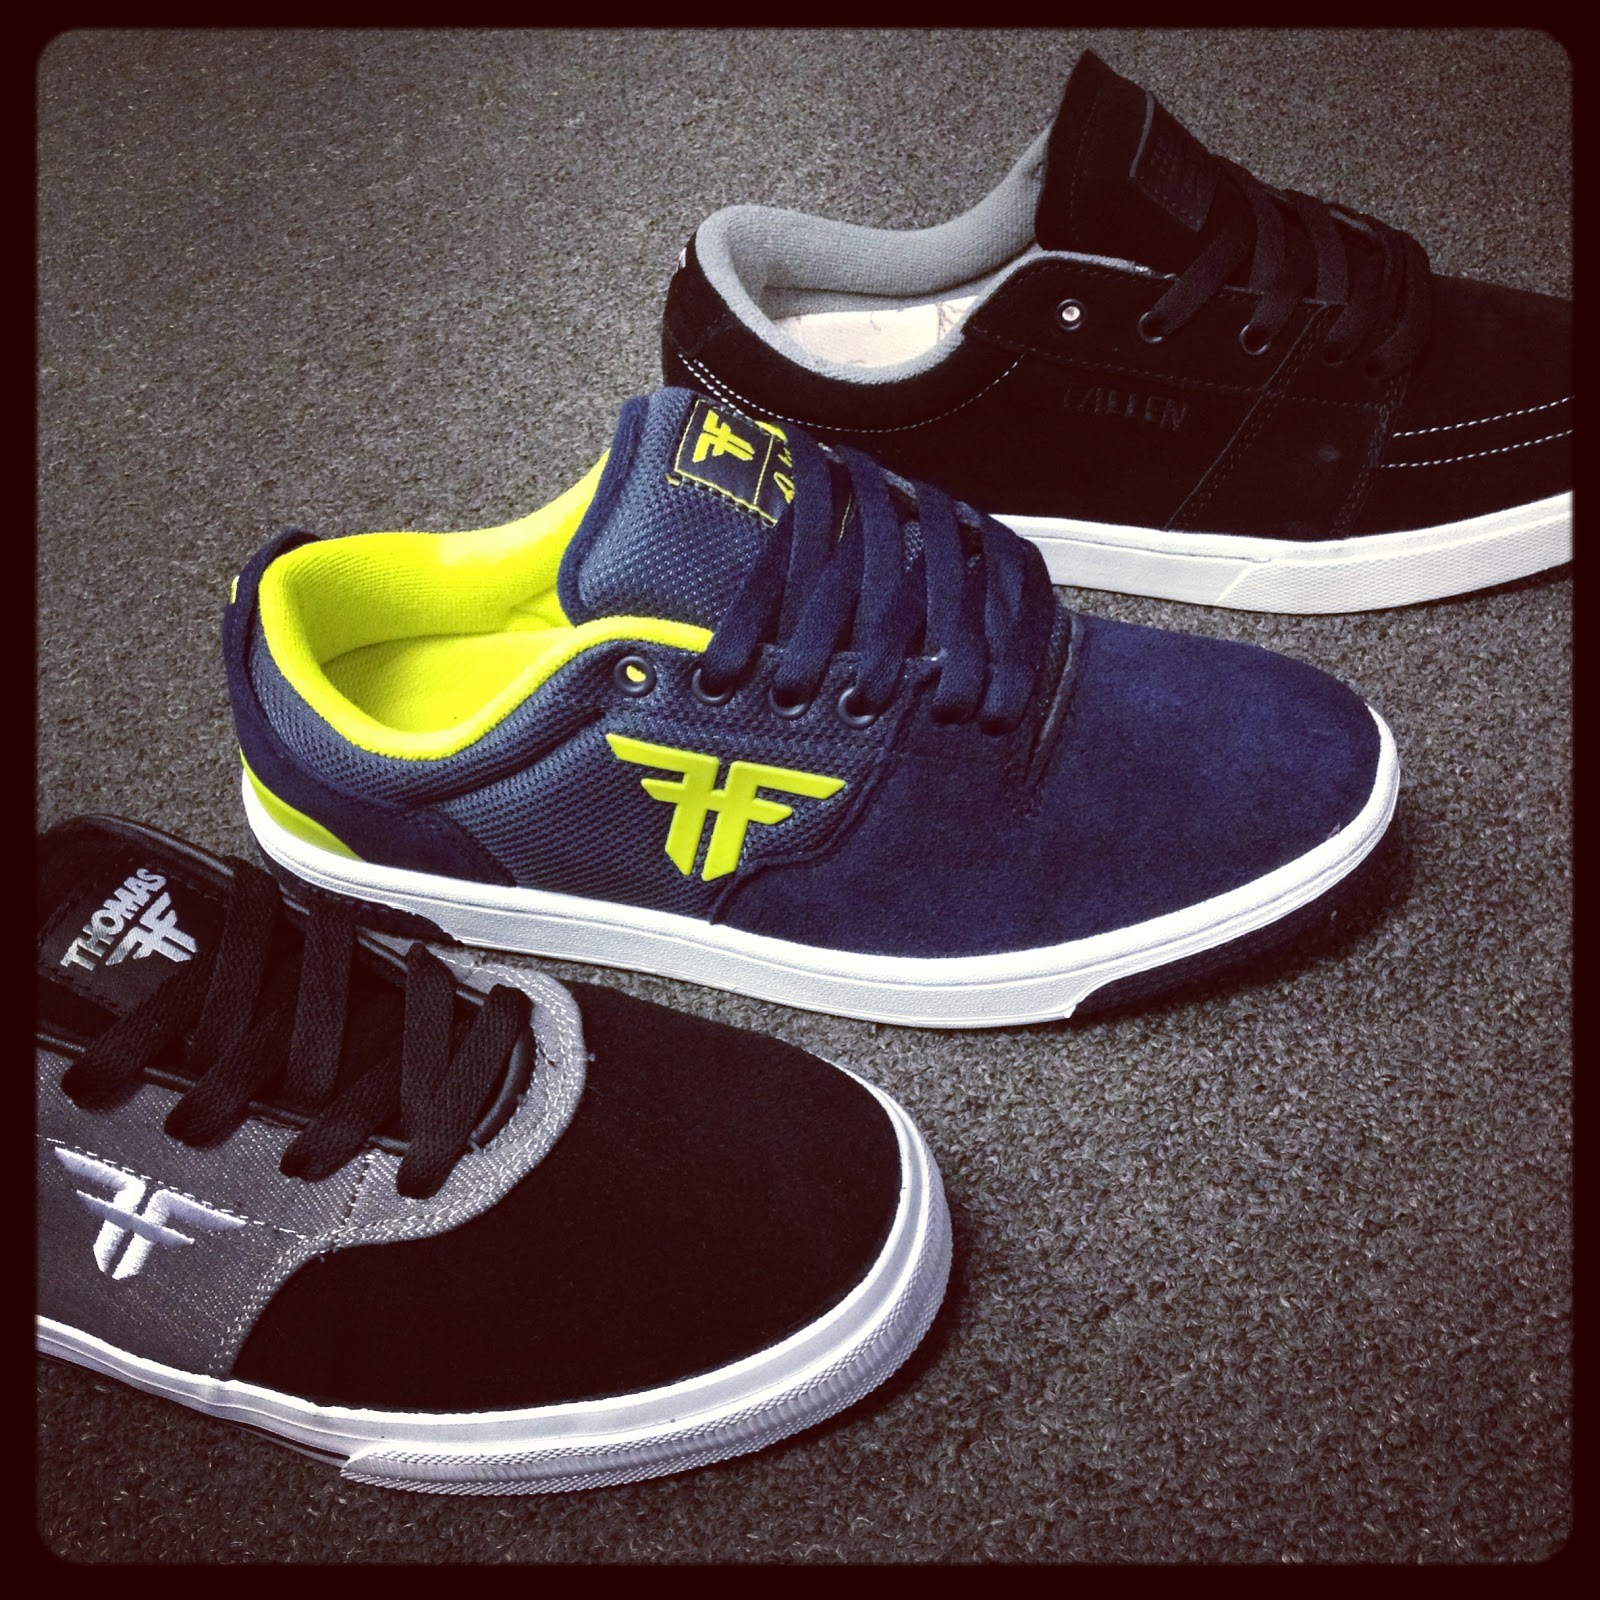 Prime Skate Shop: 3 New Shoes in from Fallen